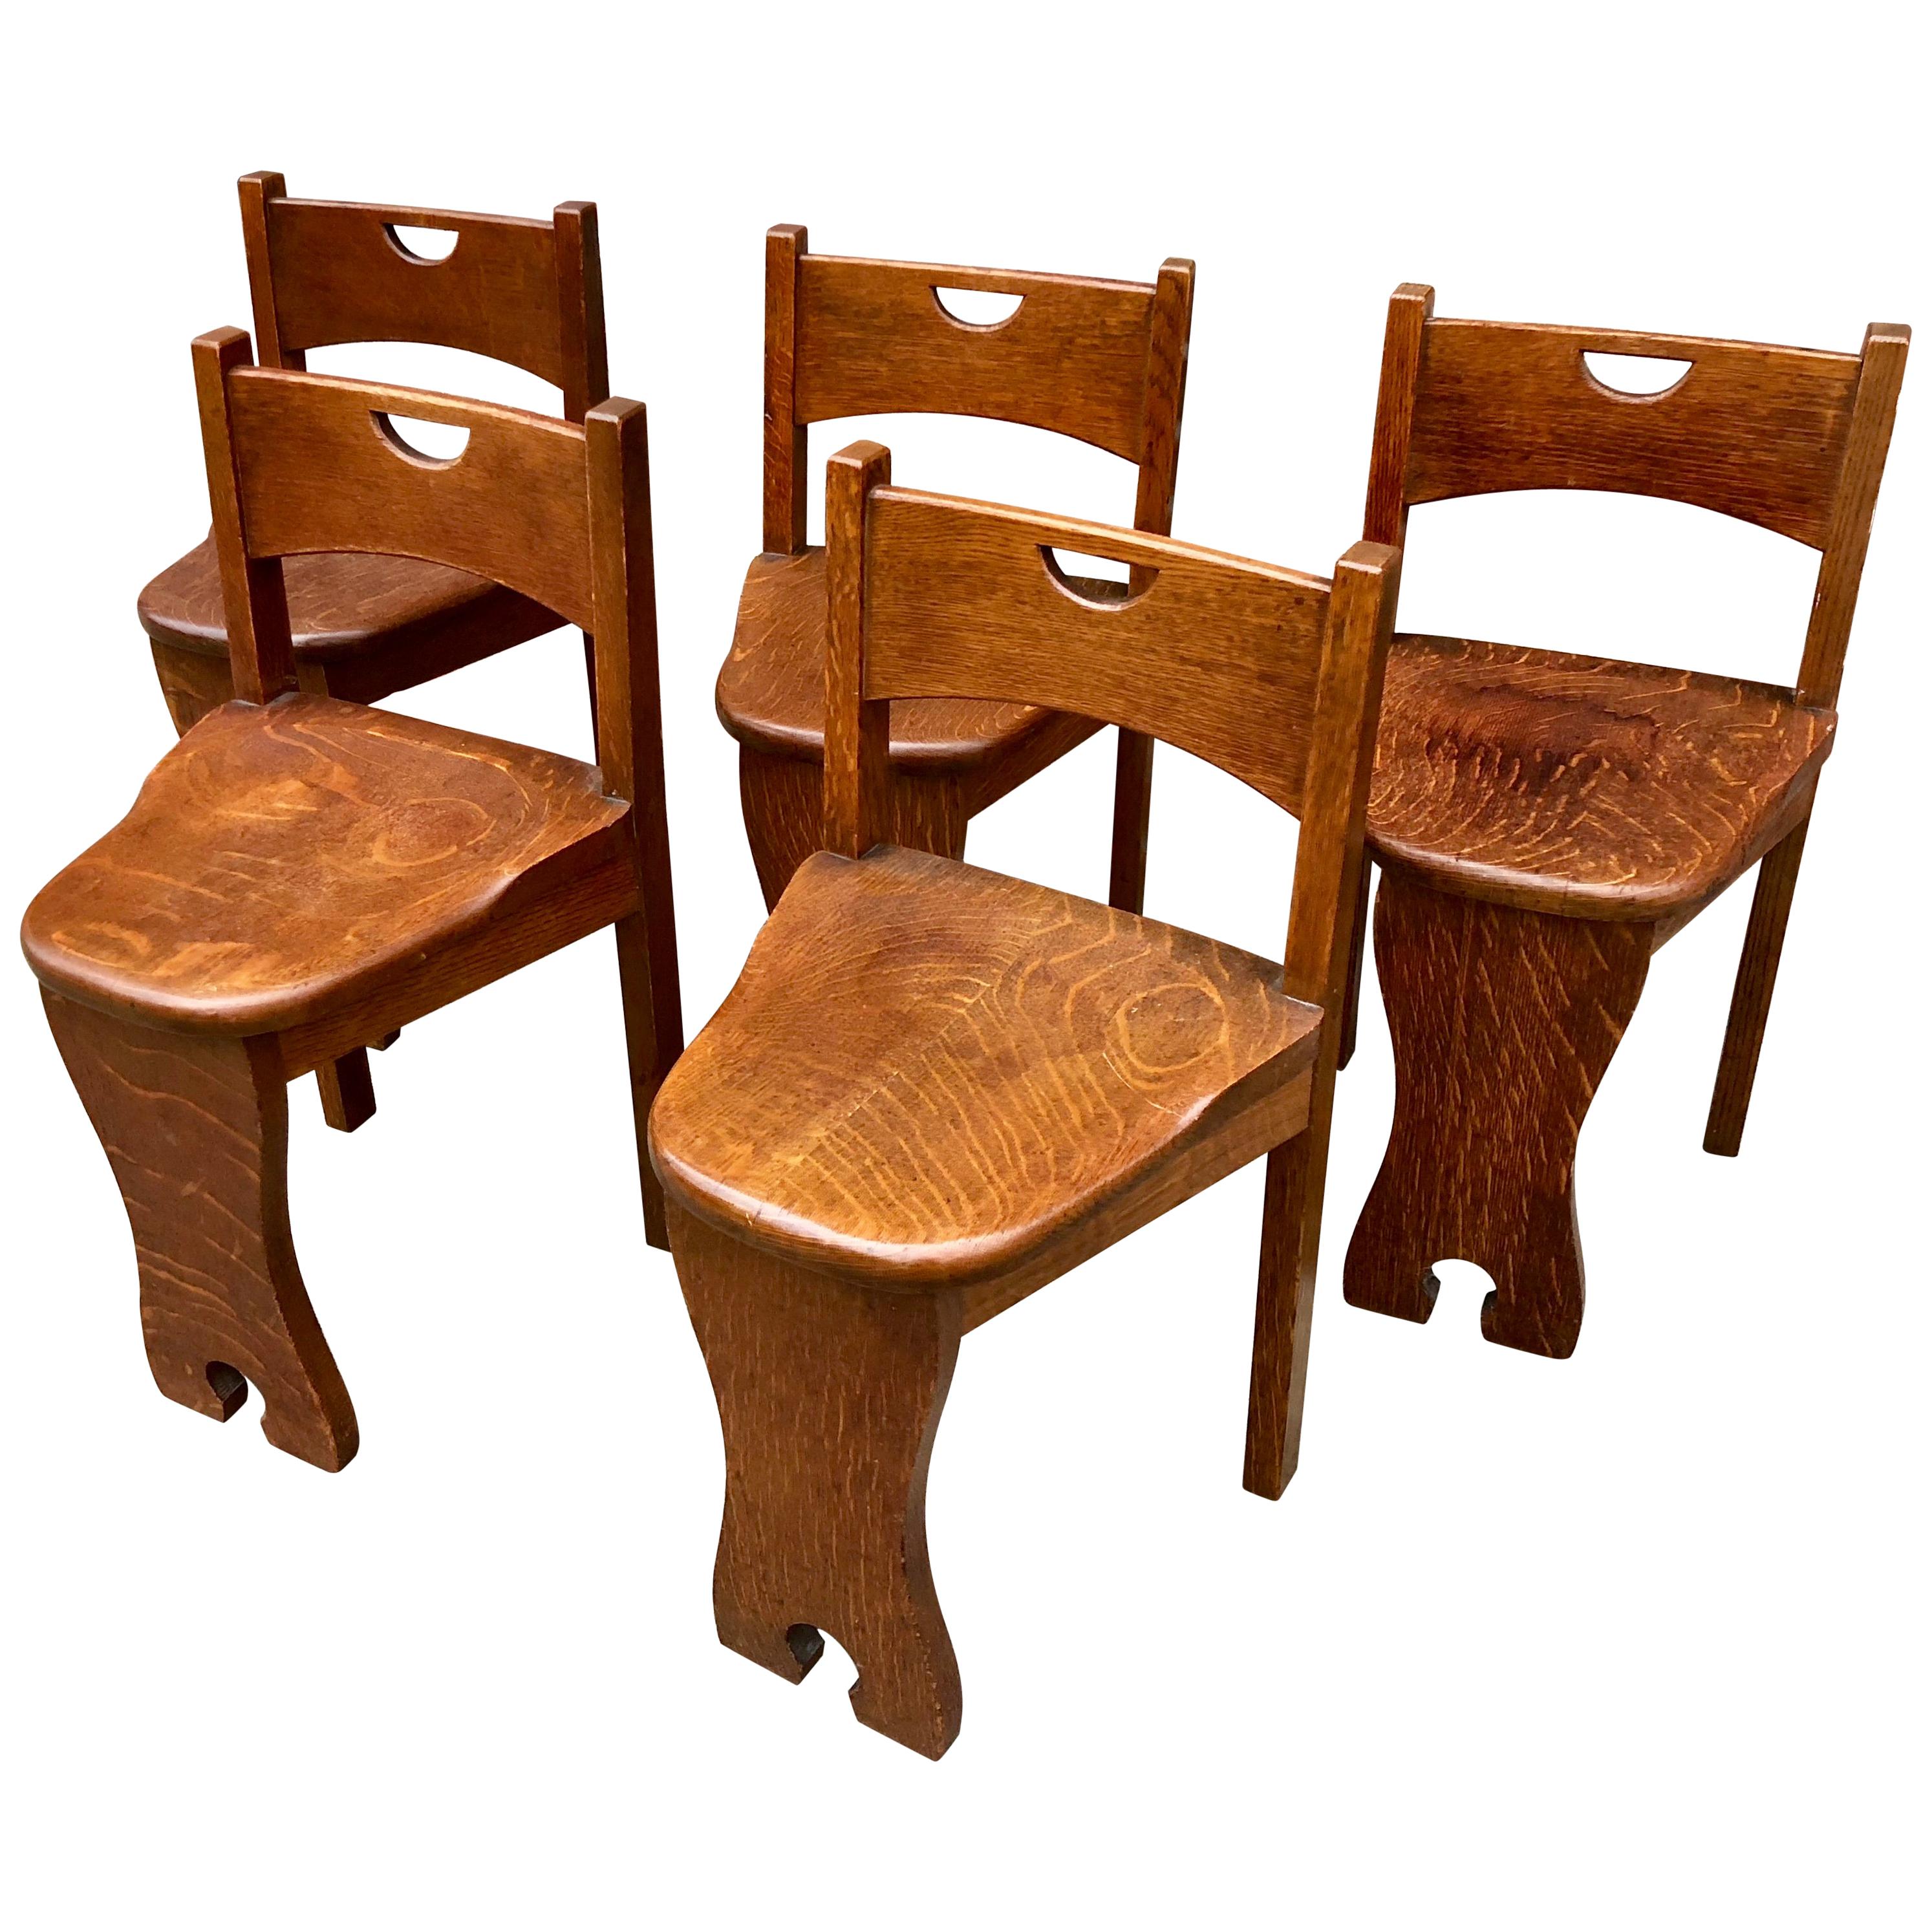 Five Oak Arts and Crafts Children's Stool/Chairs at 1stDibs